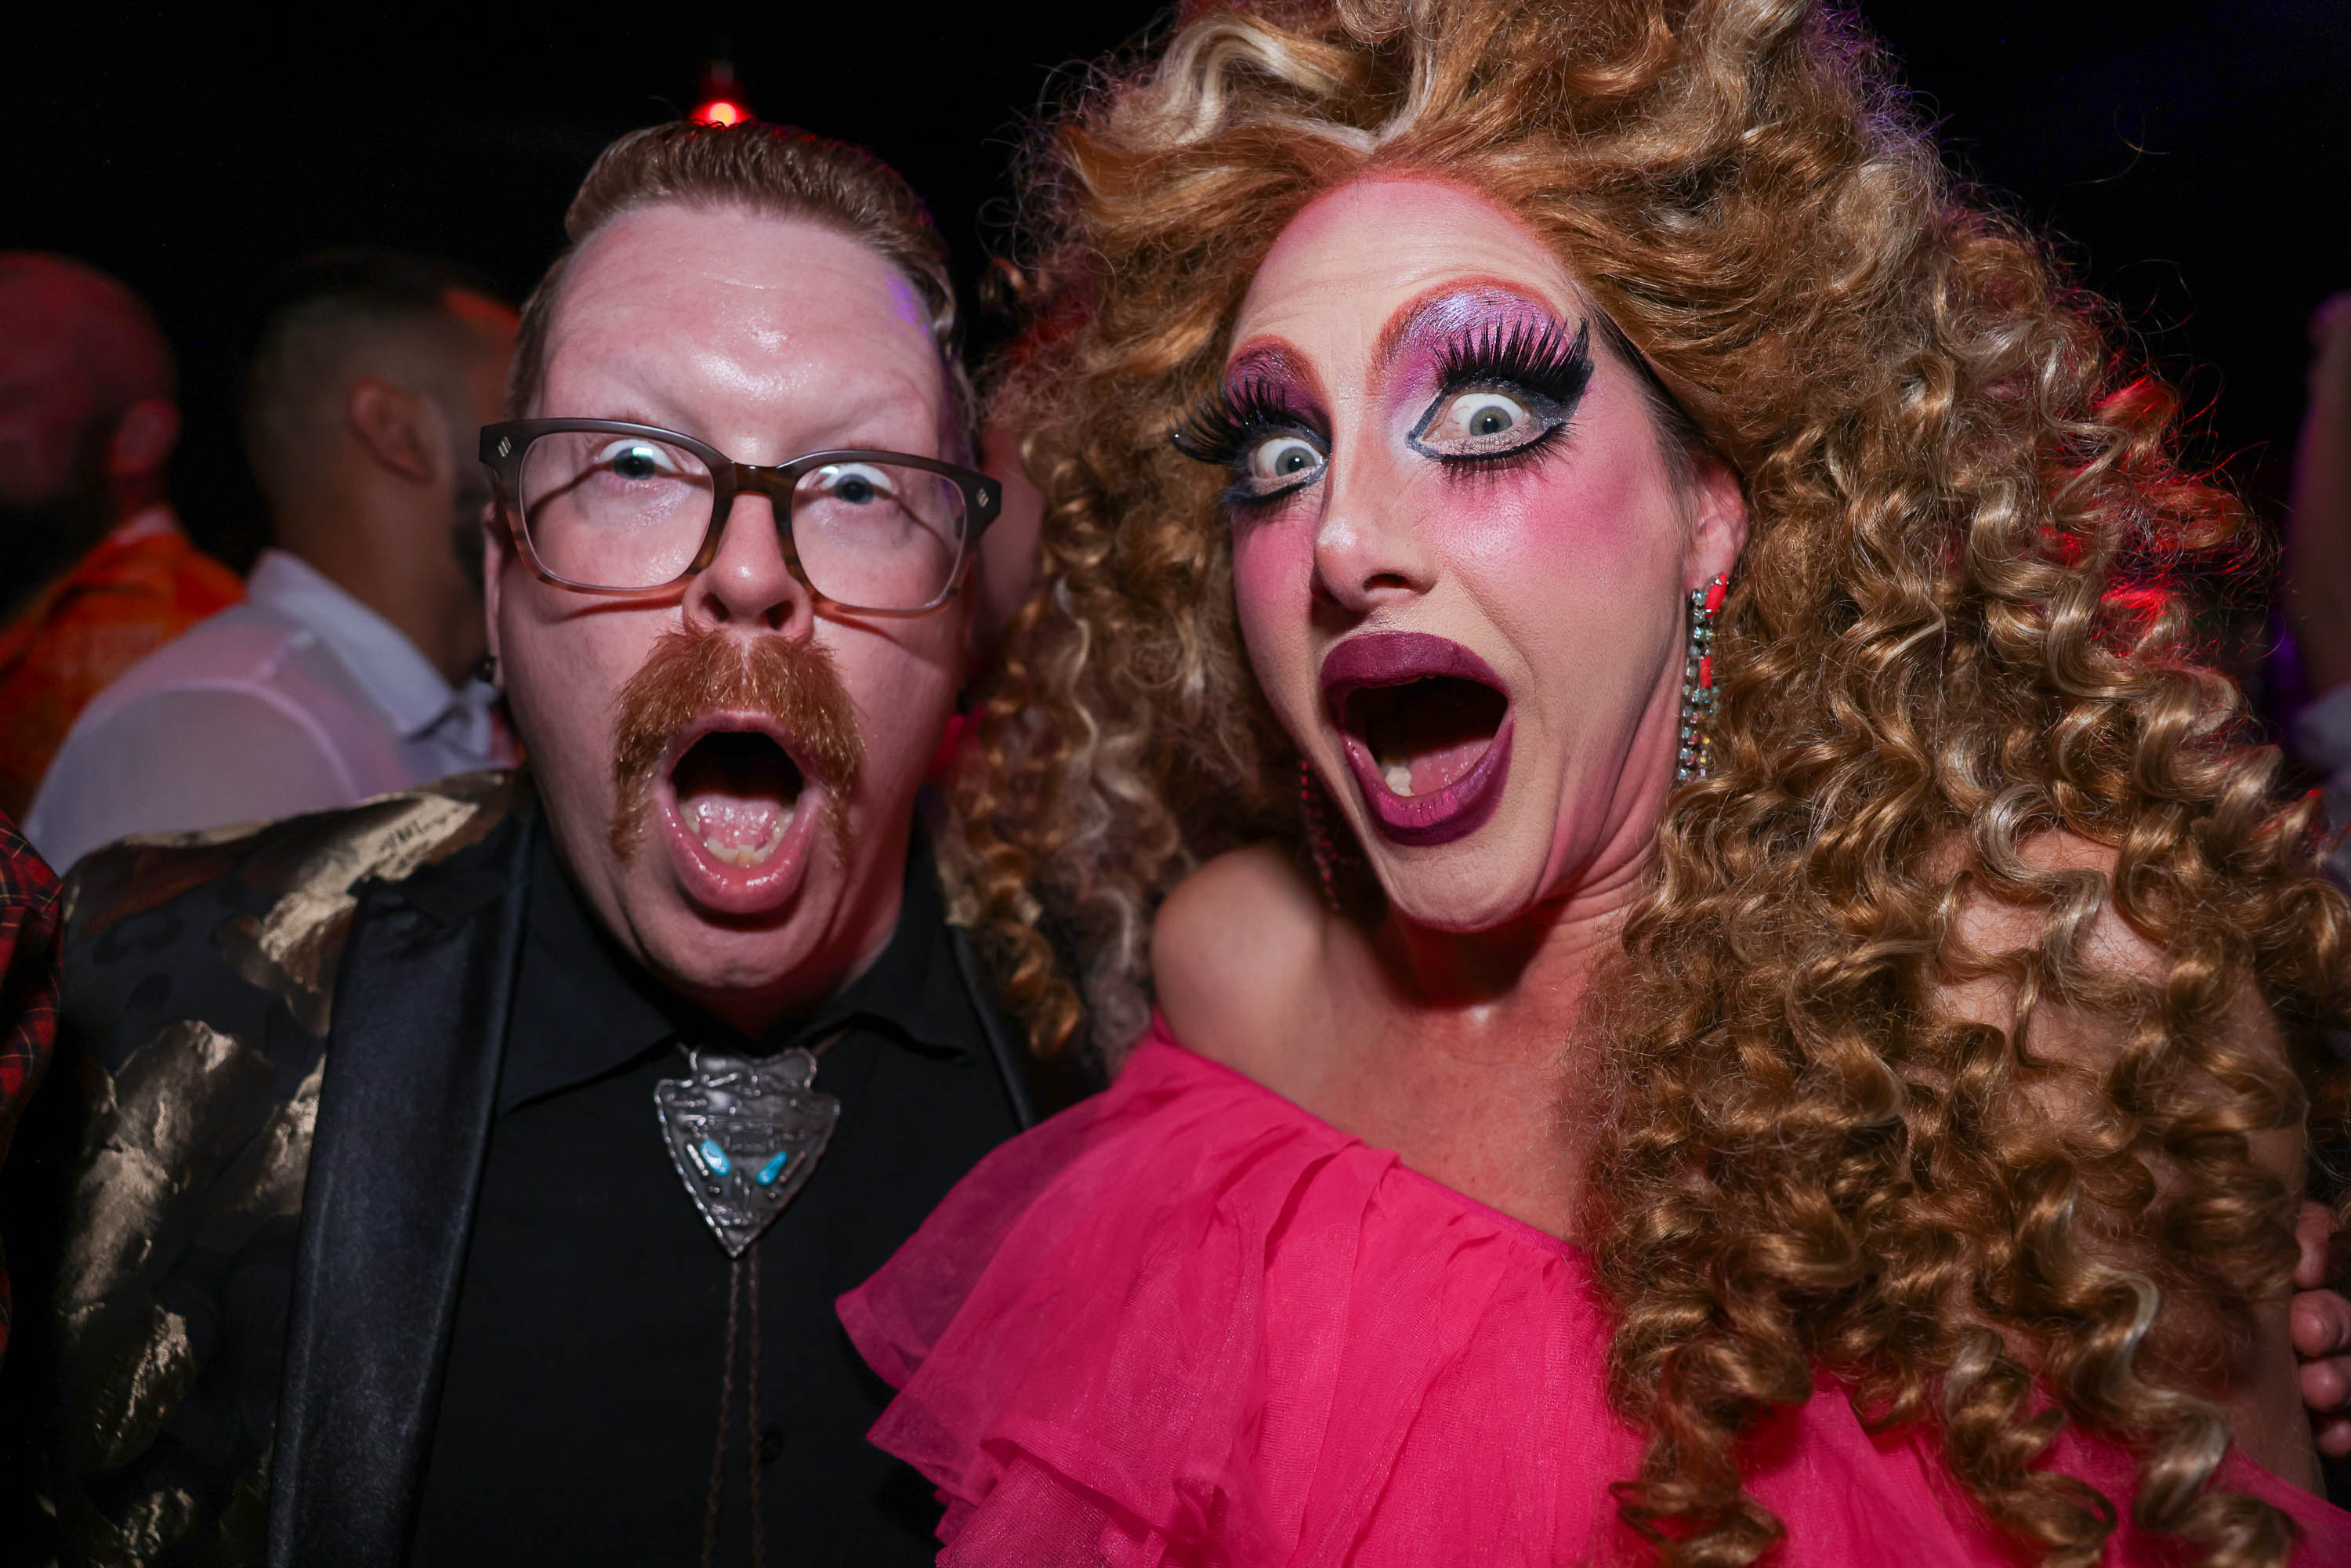 two white drag performers open their mouths wide in mock gasps, one with a mustache and glasses, the other with huge eye makeup and a curly blond wig